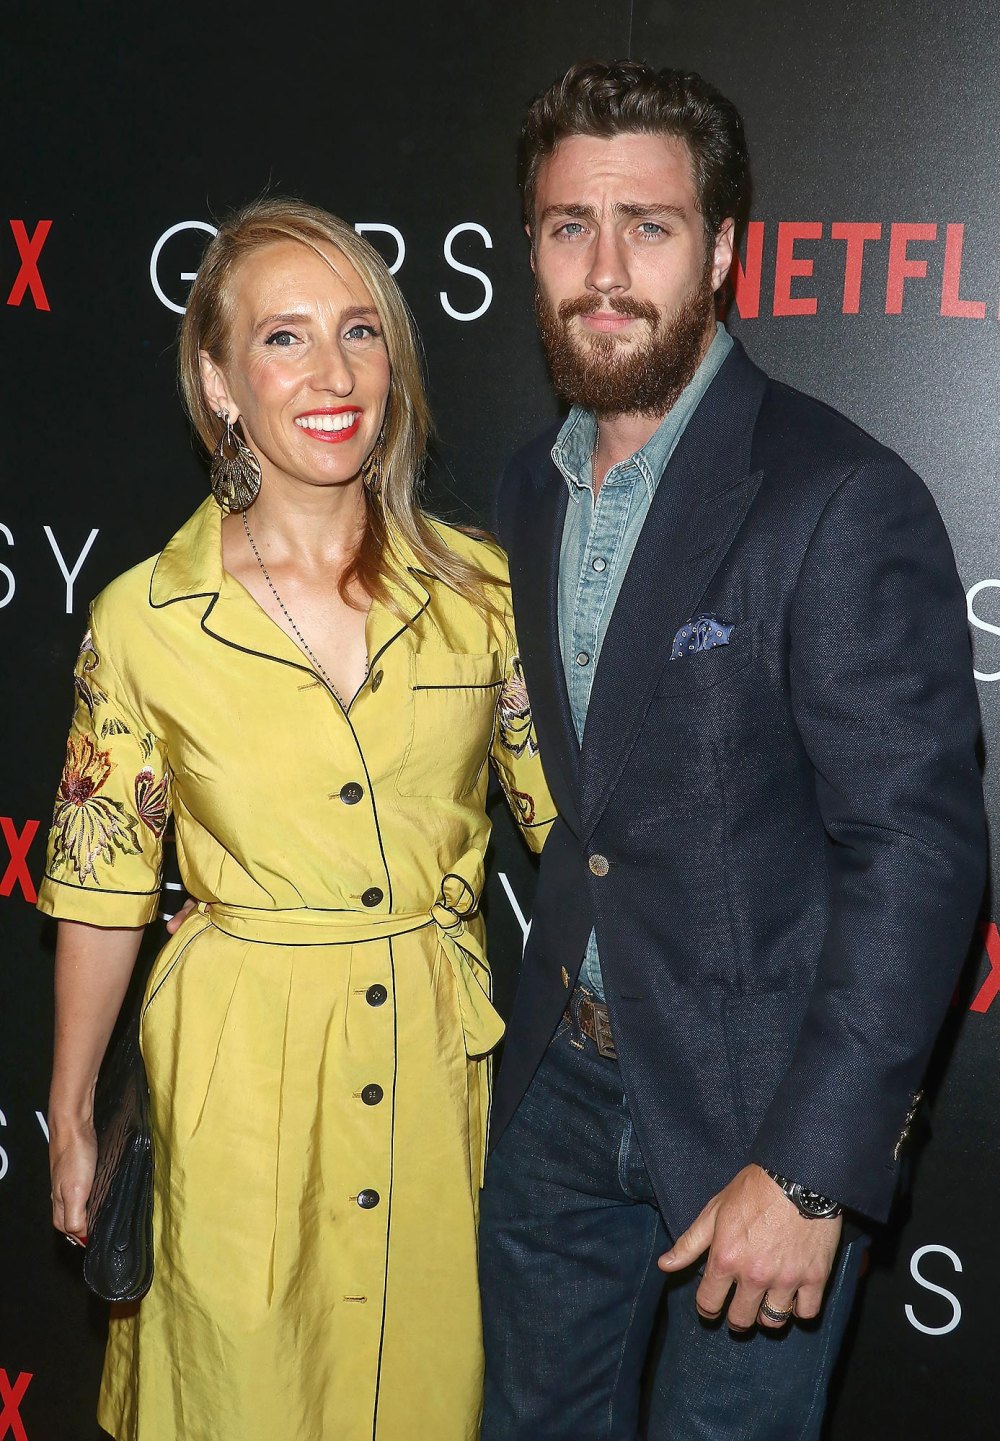 Everything Aaron Taylor Johnson (33) and Sam Taylor Johnson (57) said about the age difference in their marriage